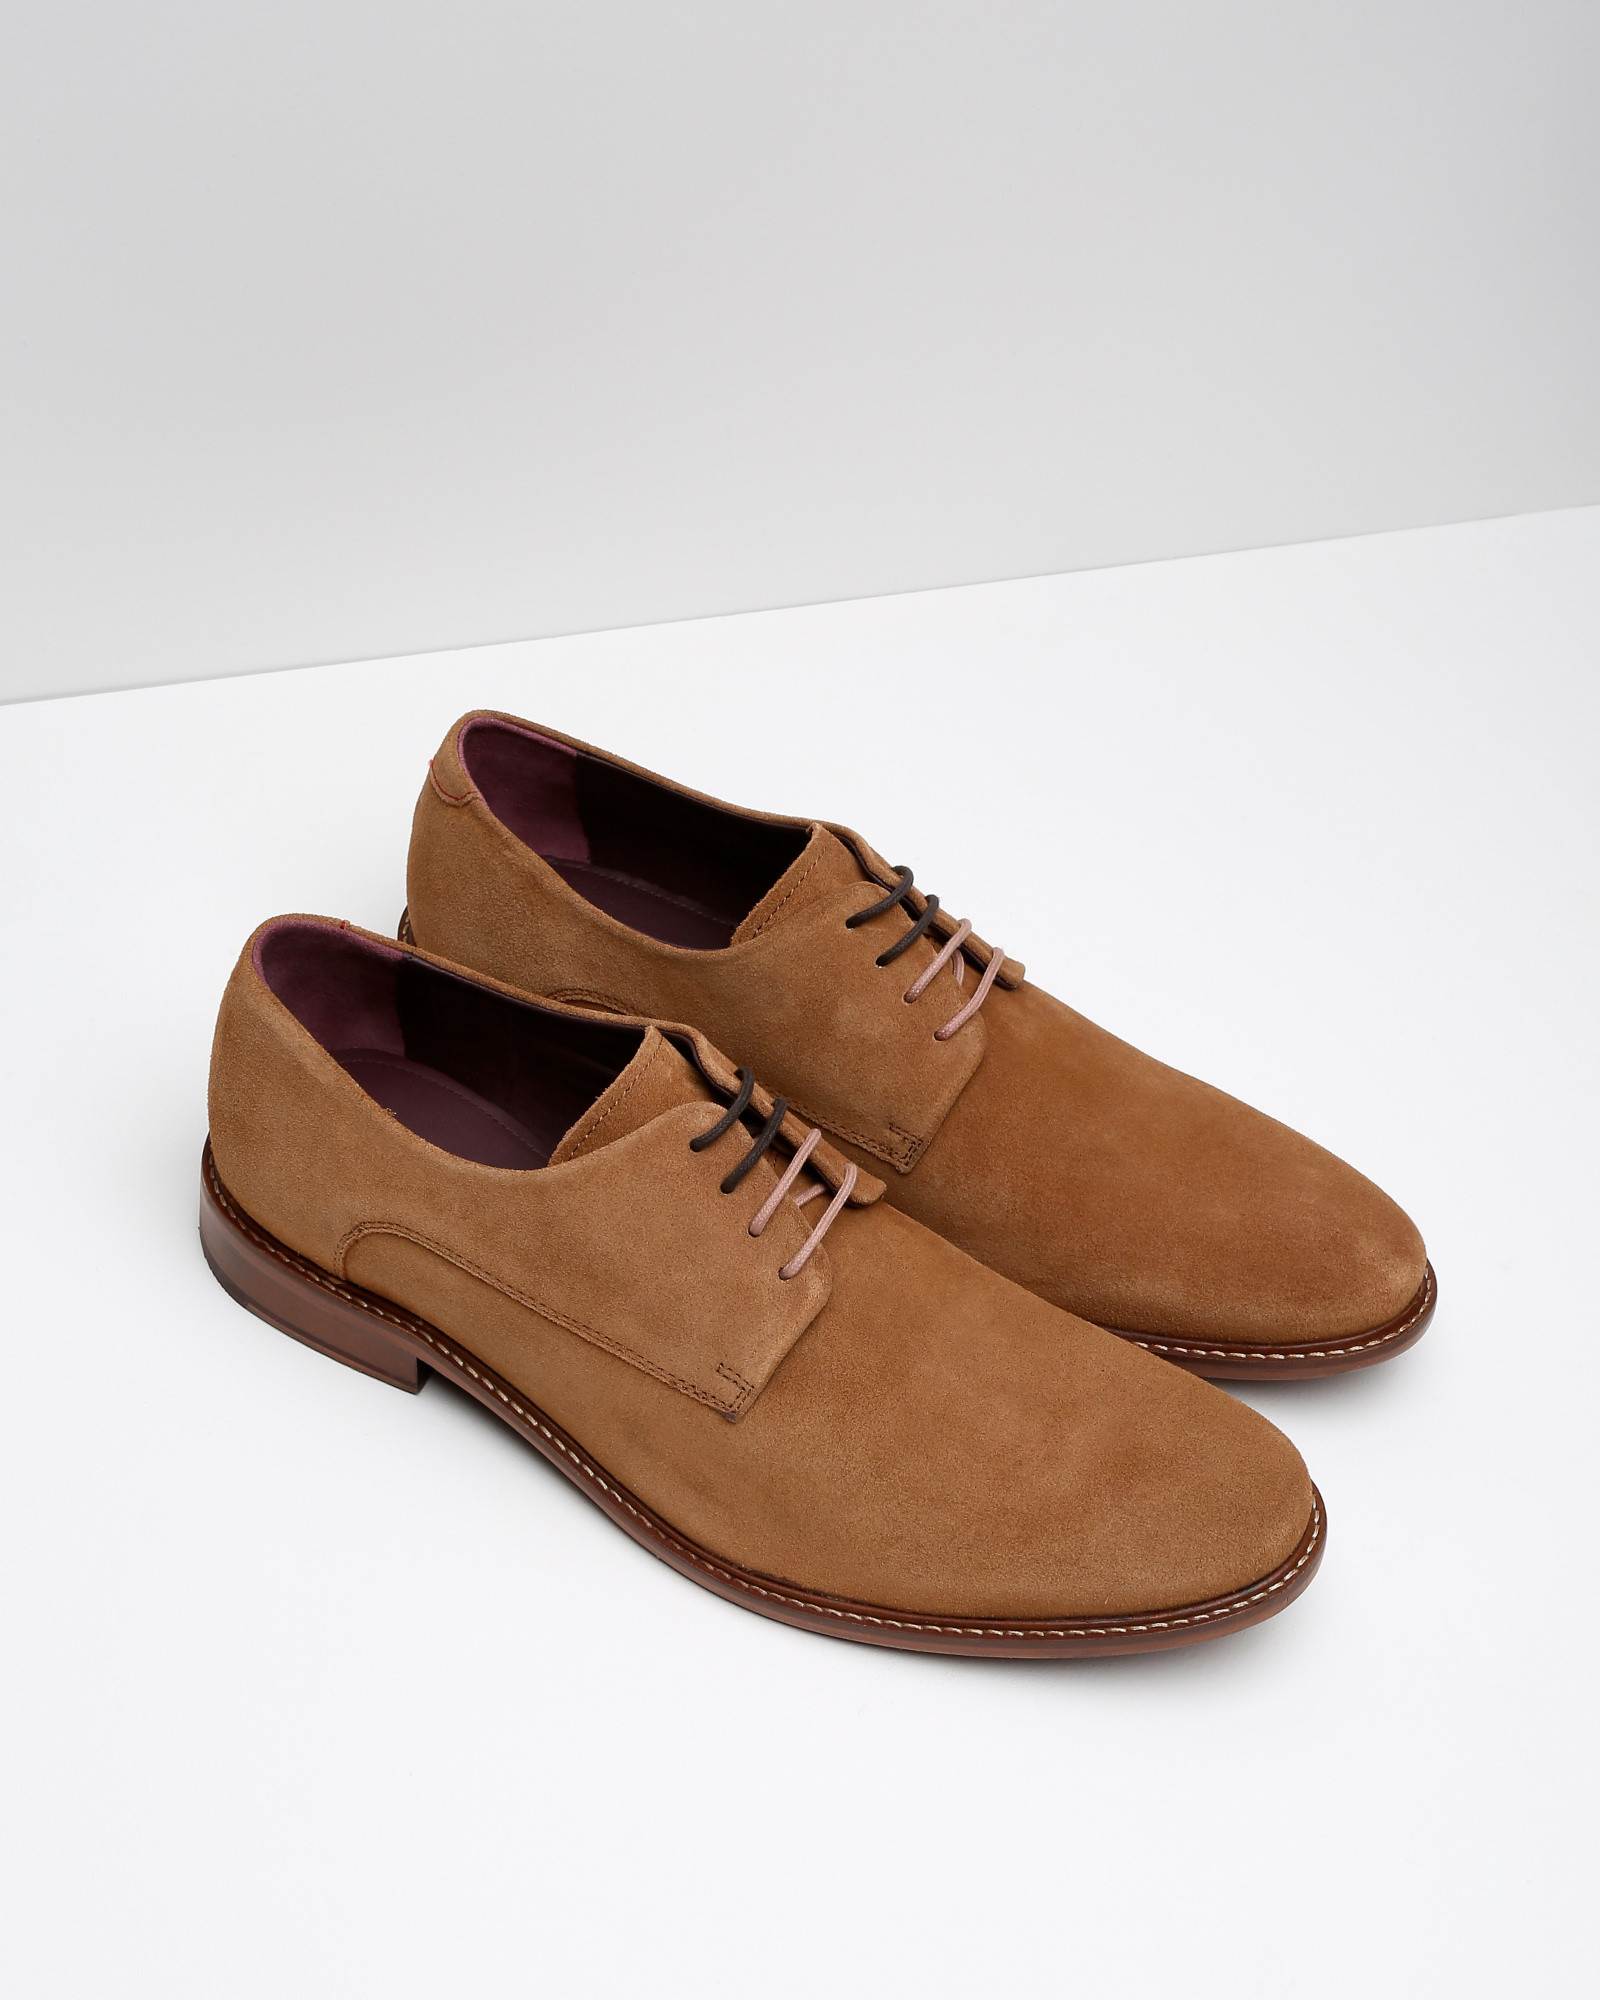 Ted Baker Classic Suede Derby Shoes in Dark Tan (Brown) for Men - Lyst